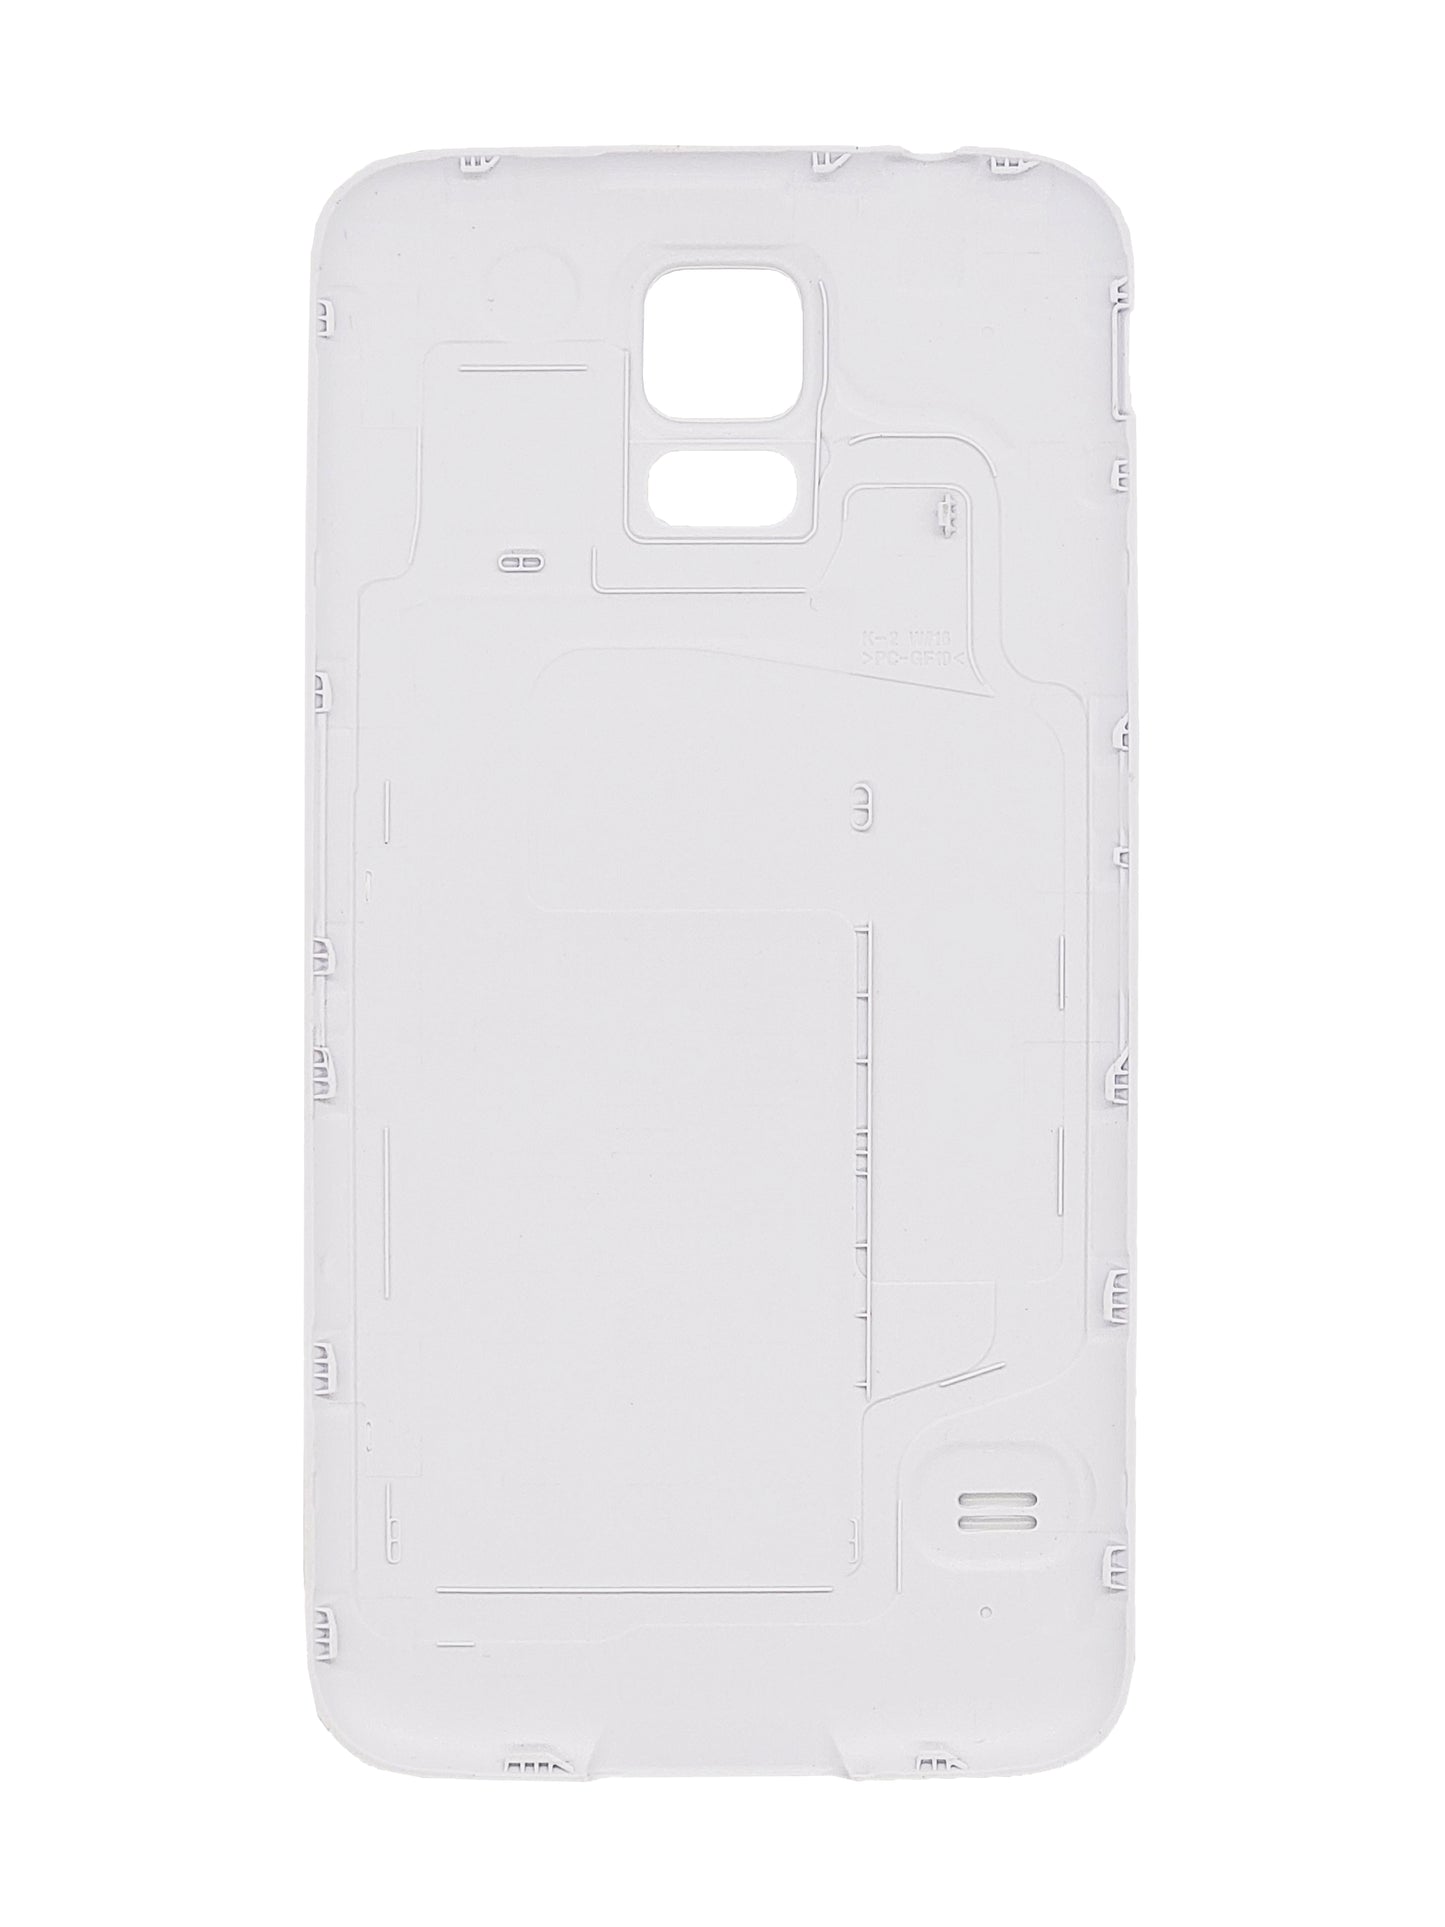 SGS S5 Back Cover (White)